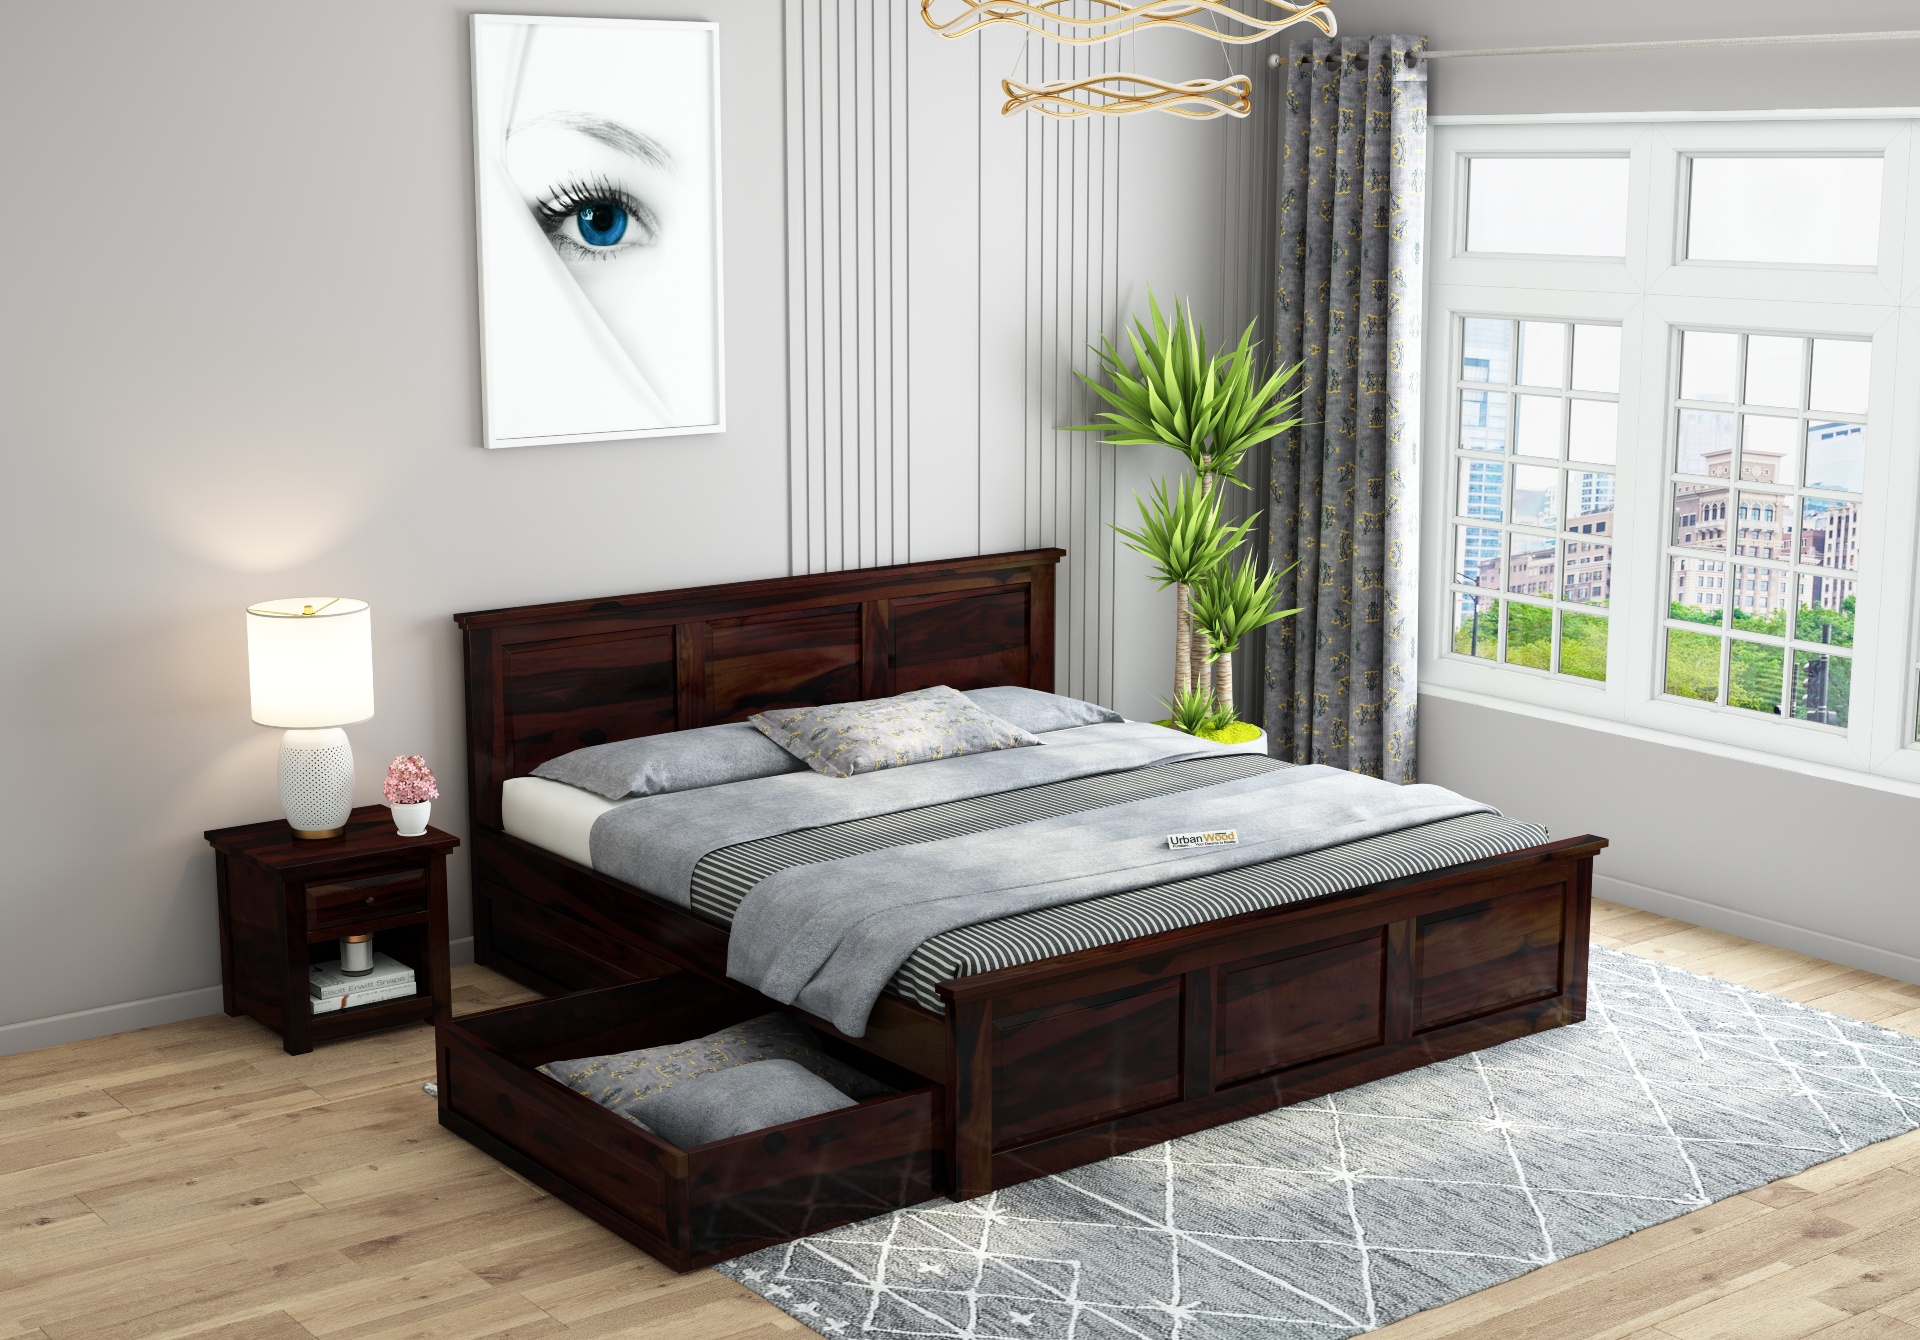 Babson Bed With Drawer Storage ( King Size, Walnut Finish )